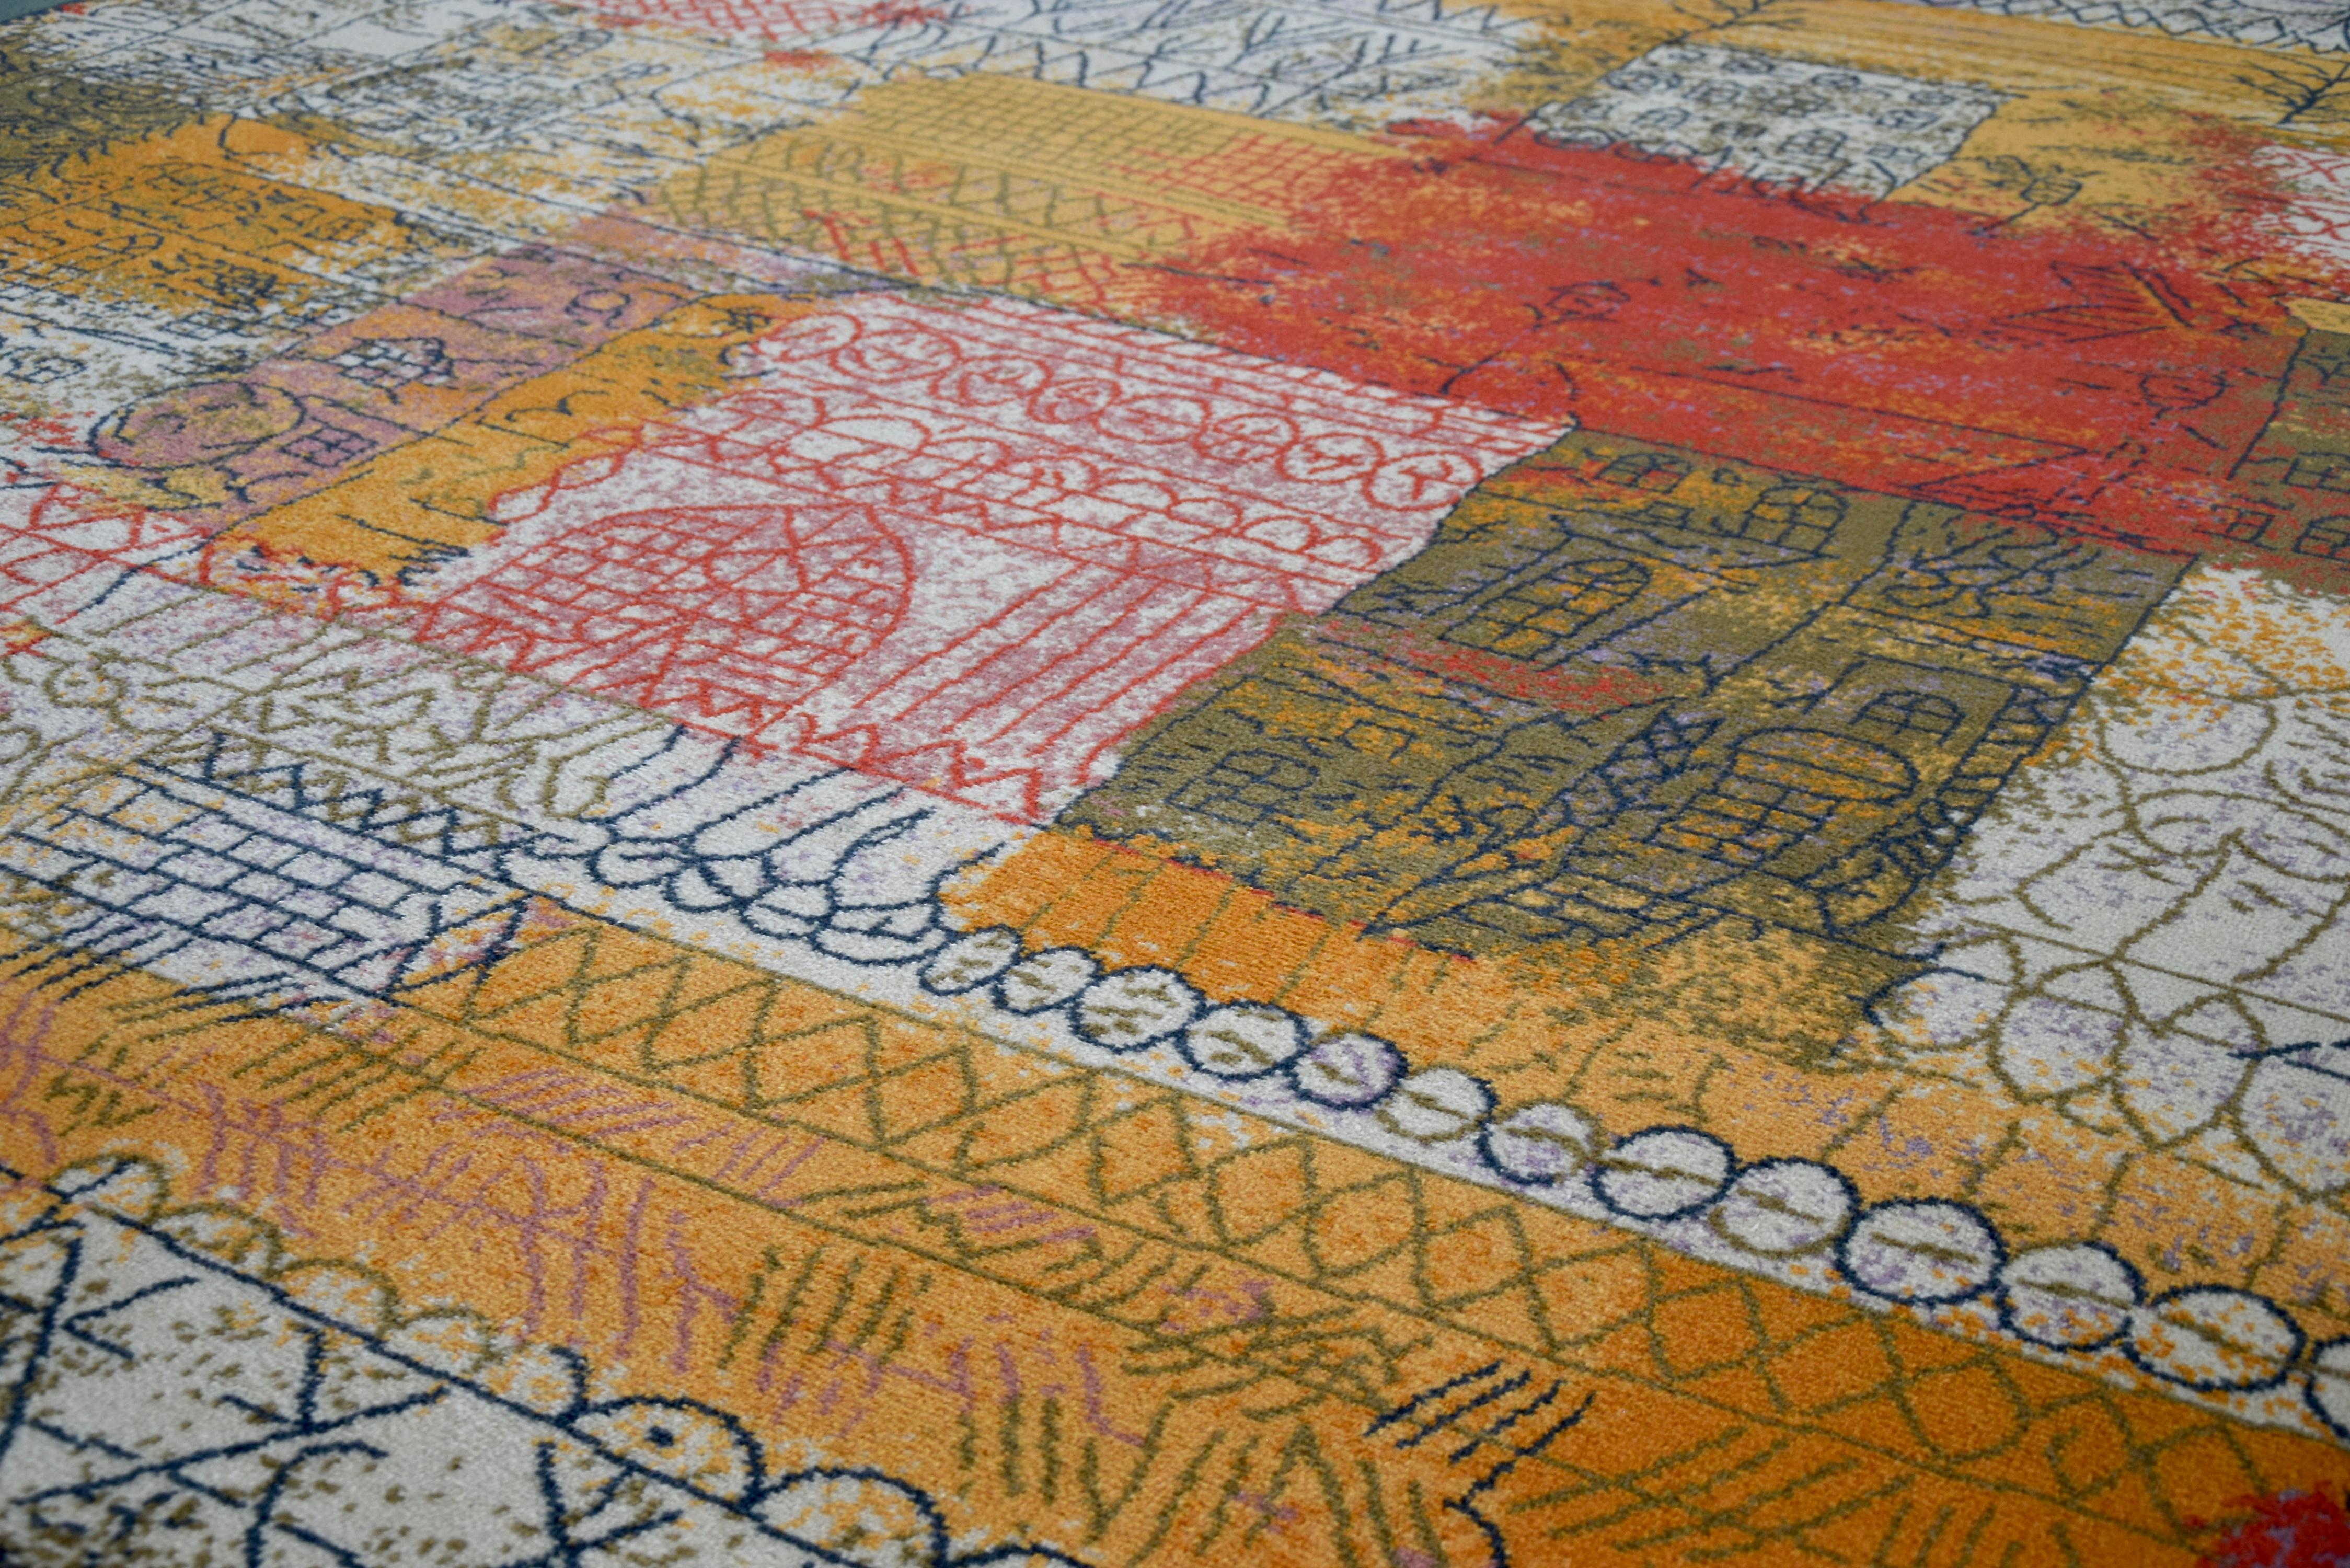 Big beautiful and colorful 100% wool art rug after Paul Klee's 